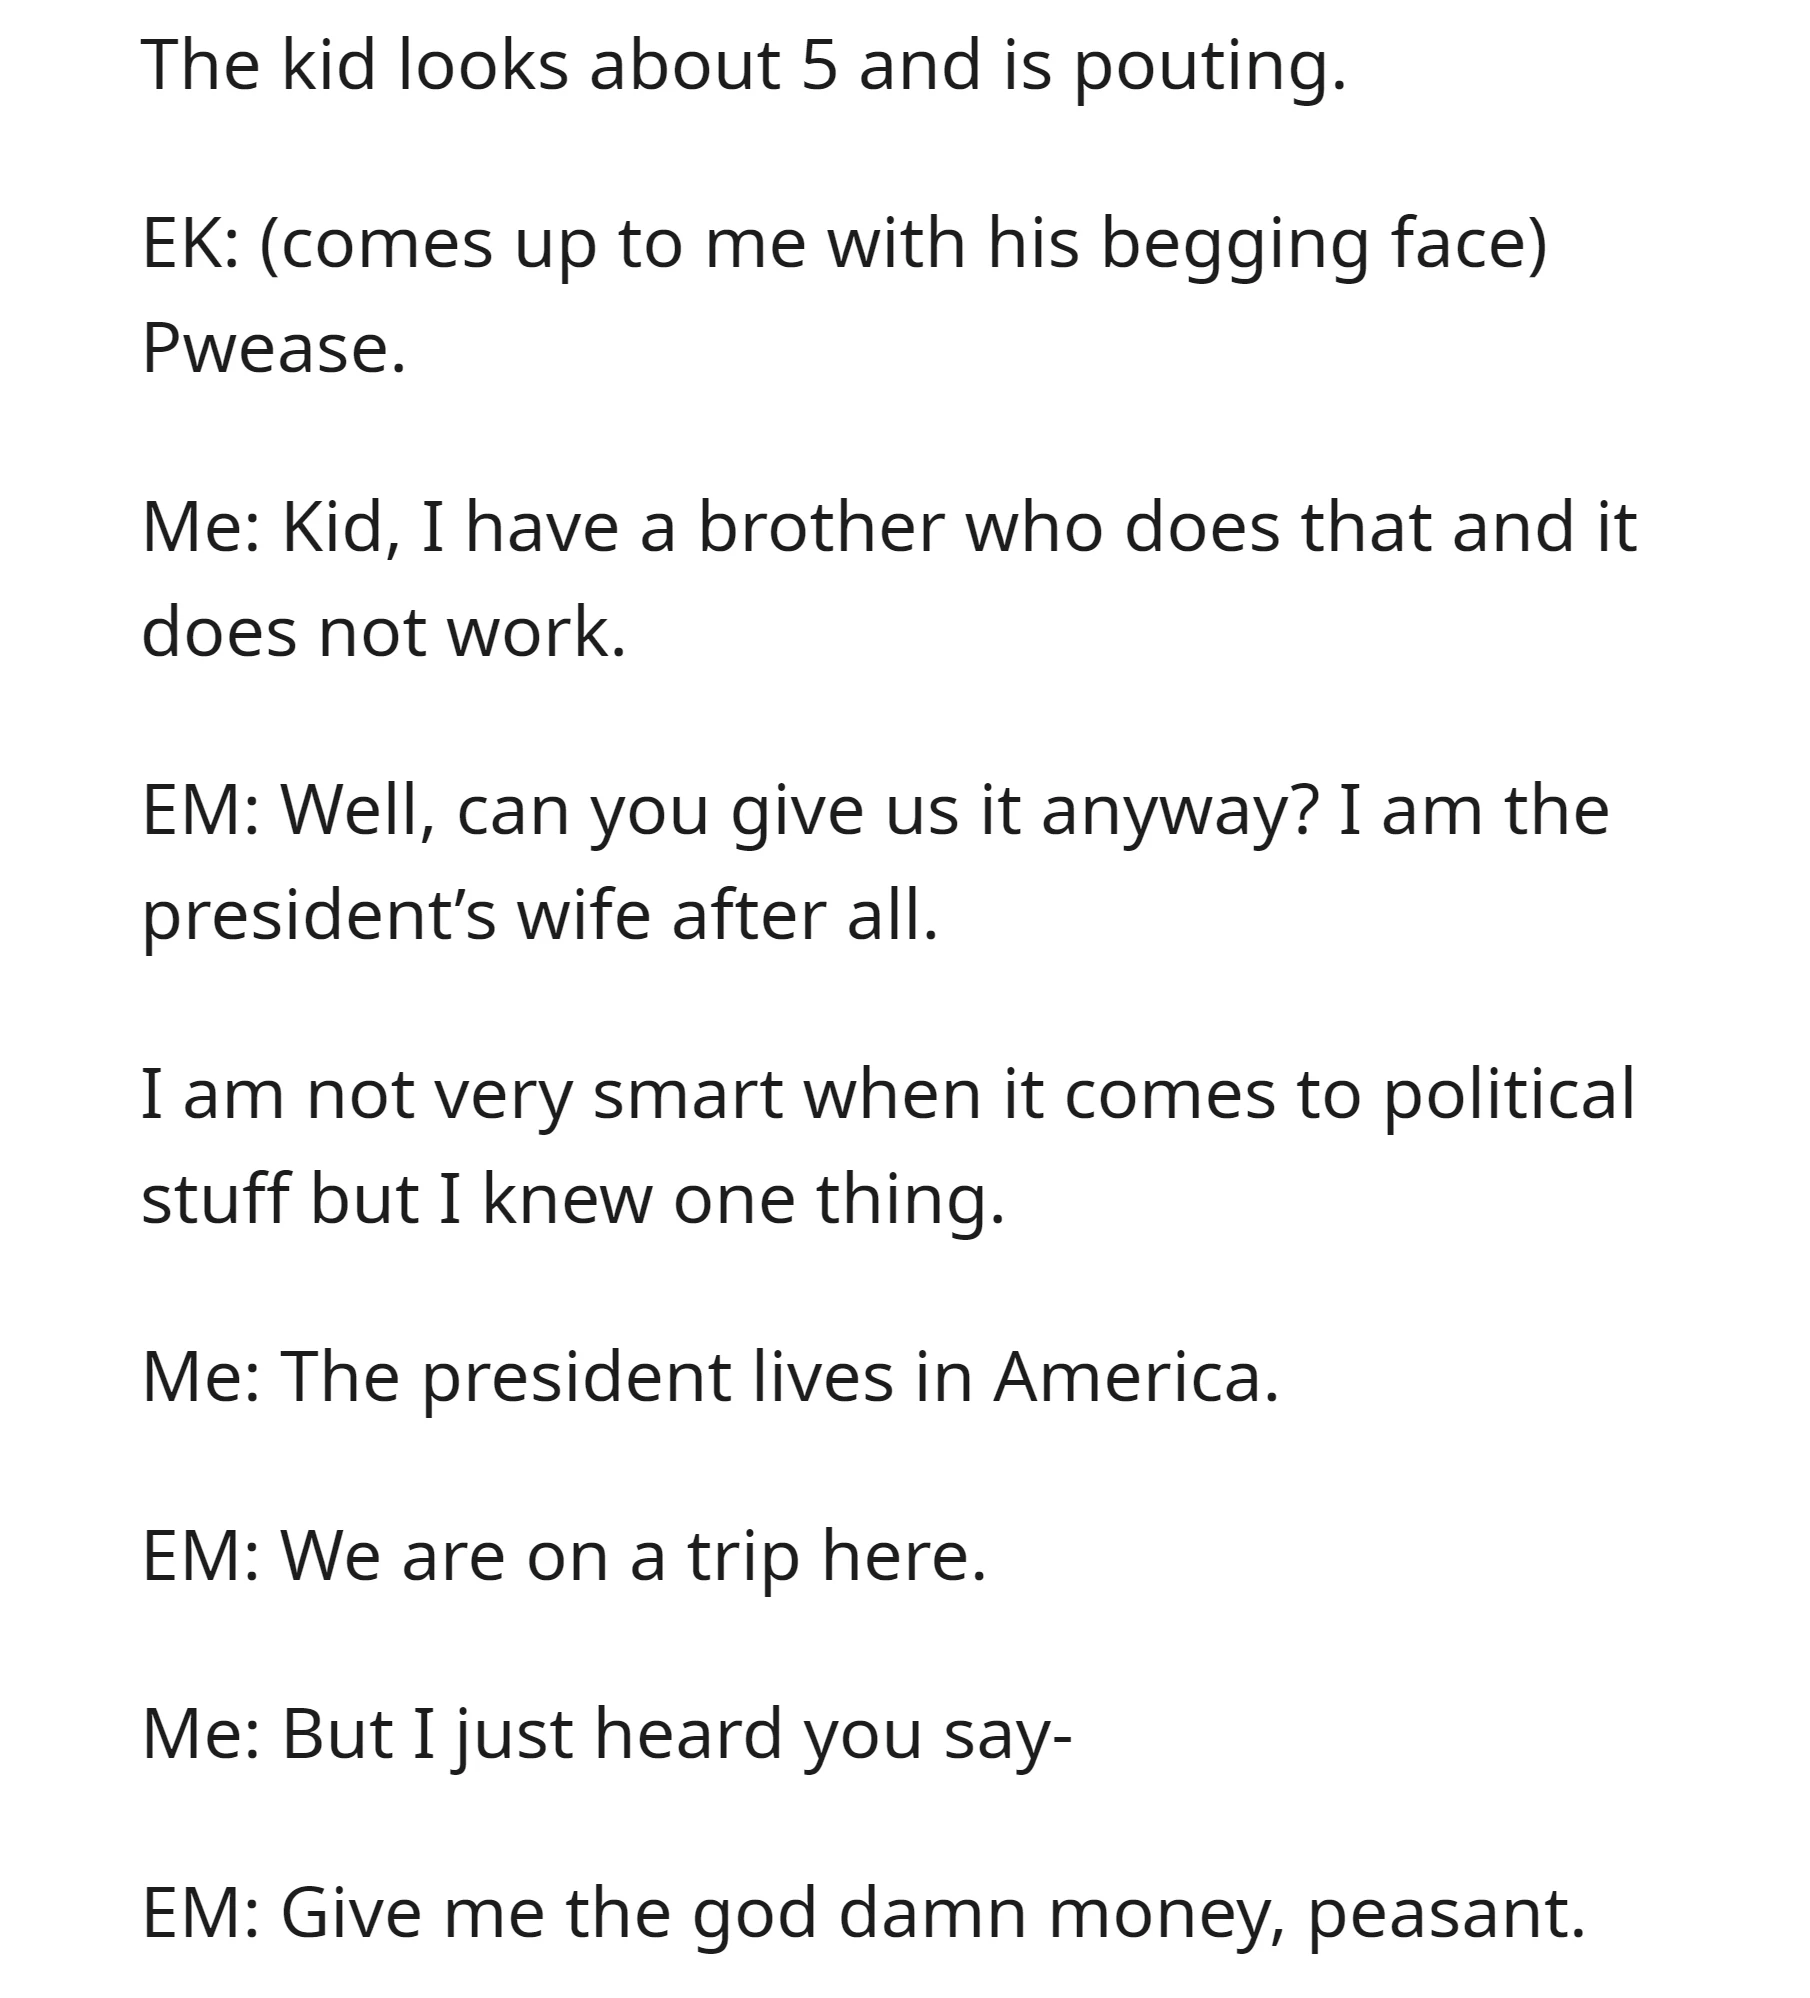 EM falsely claimed to be the president's wife